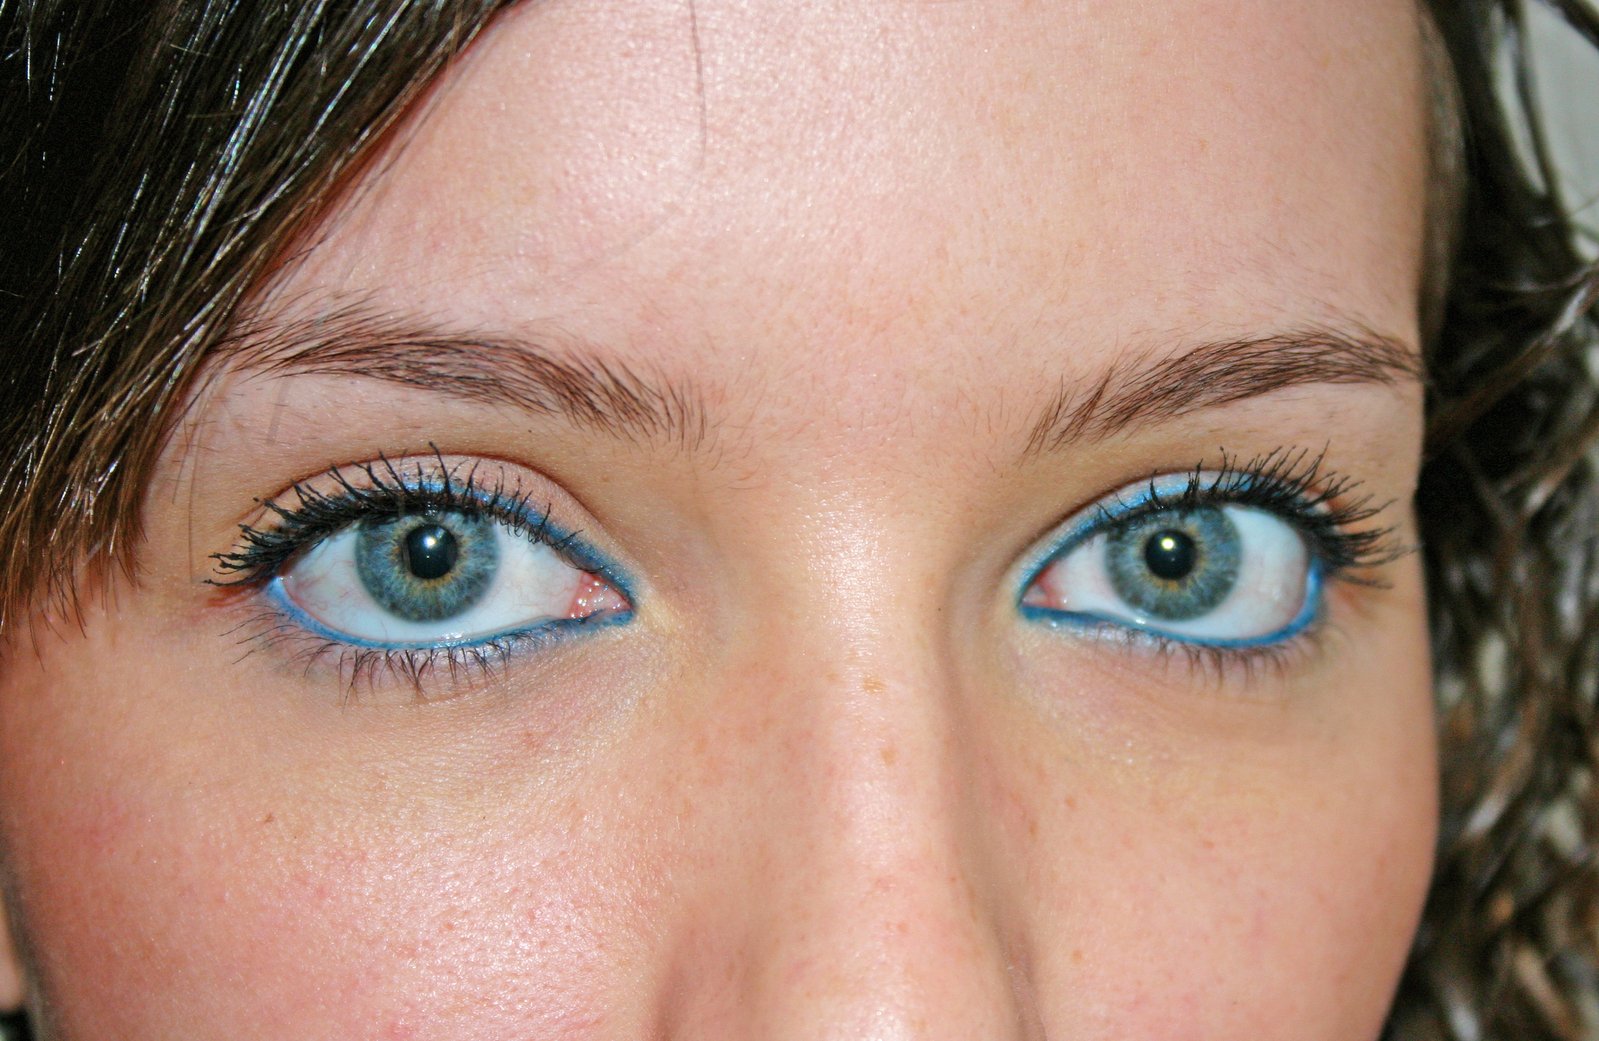 the girl's blue eyes are covered with mascara